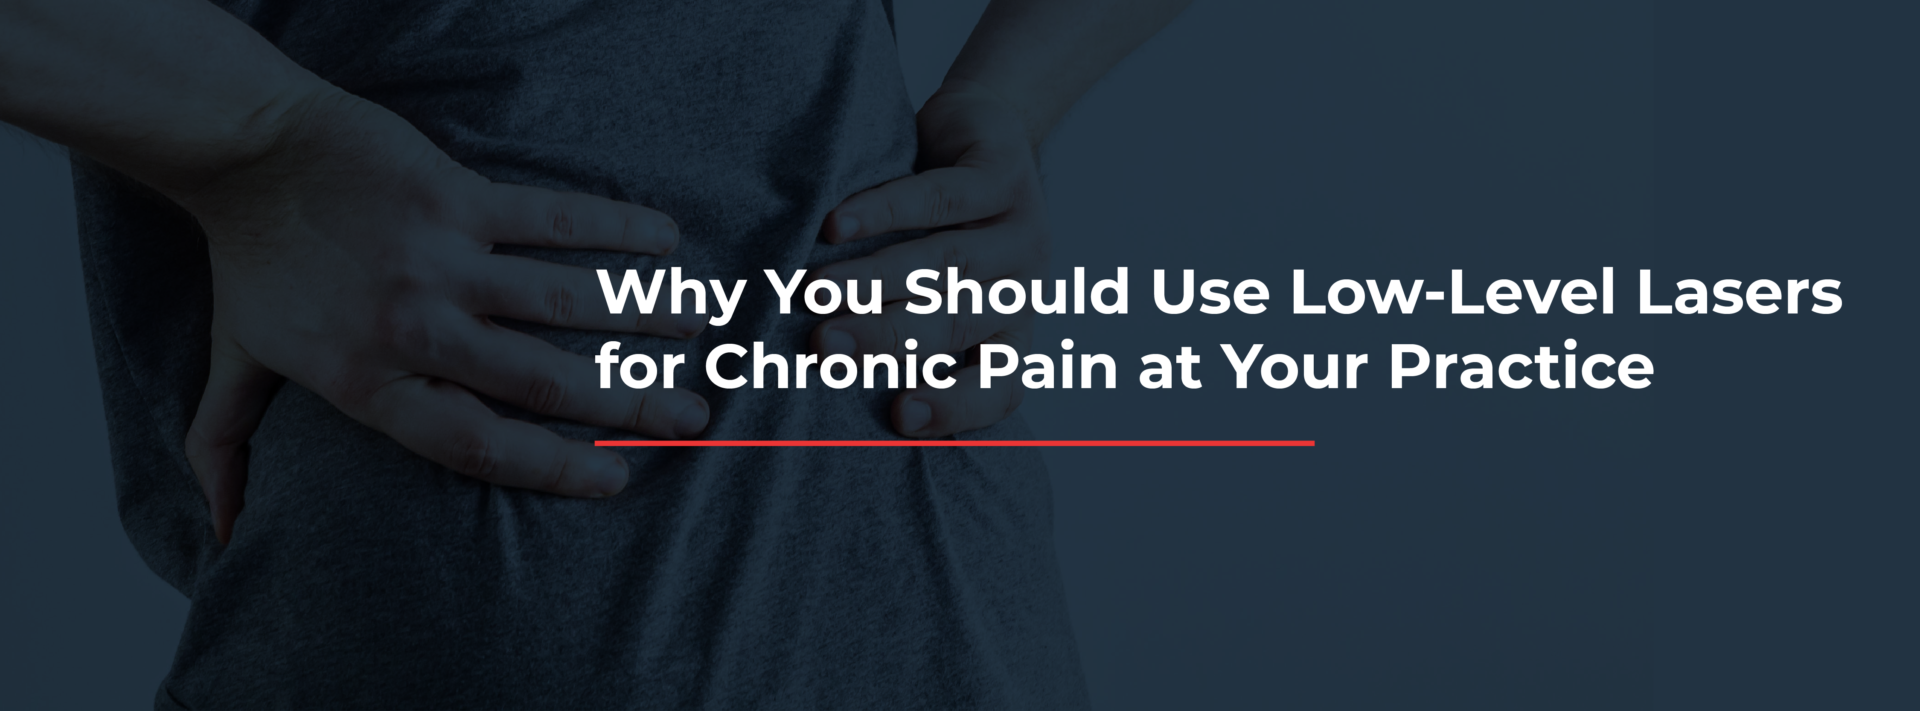 Why You Should Use Low-Level Lasers for Chronic Pain at Your Practice